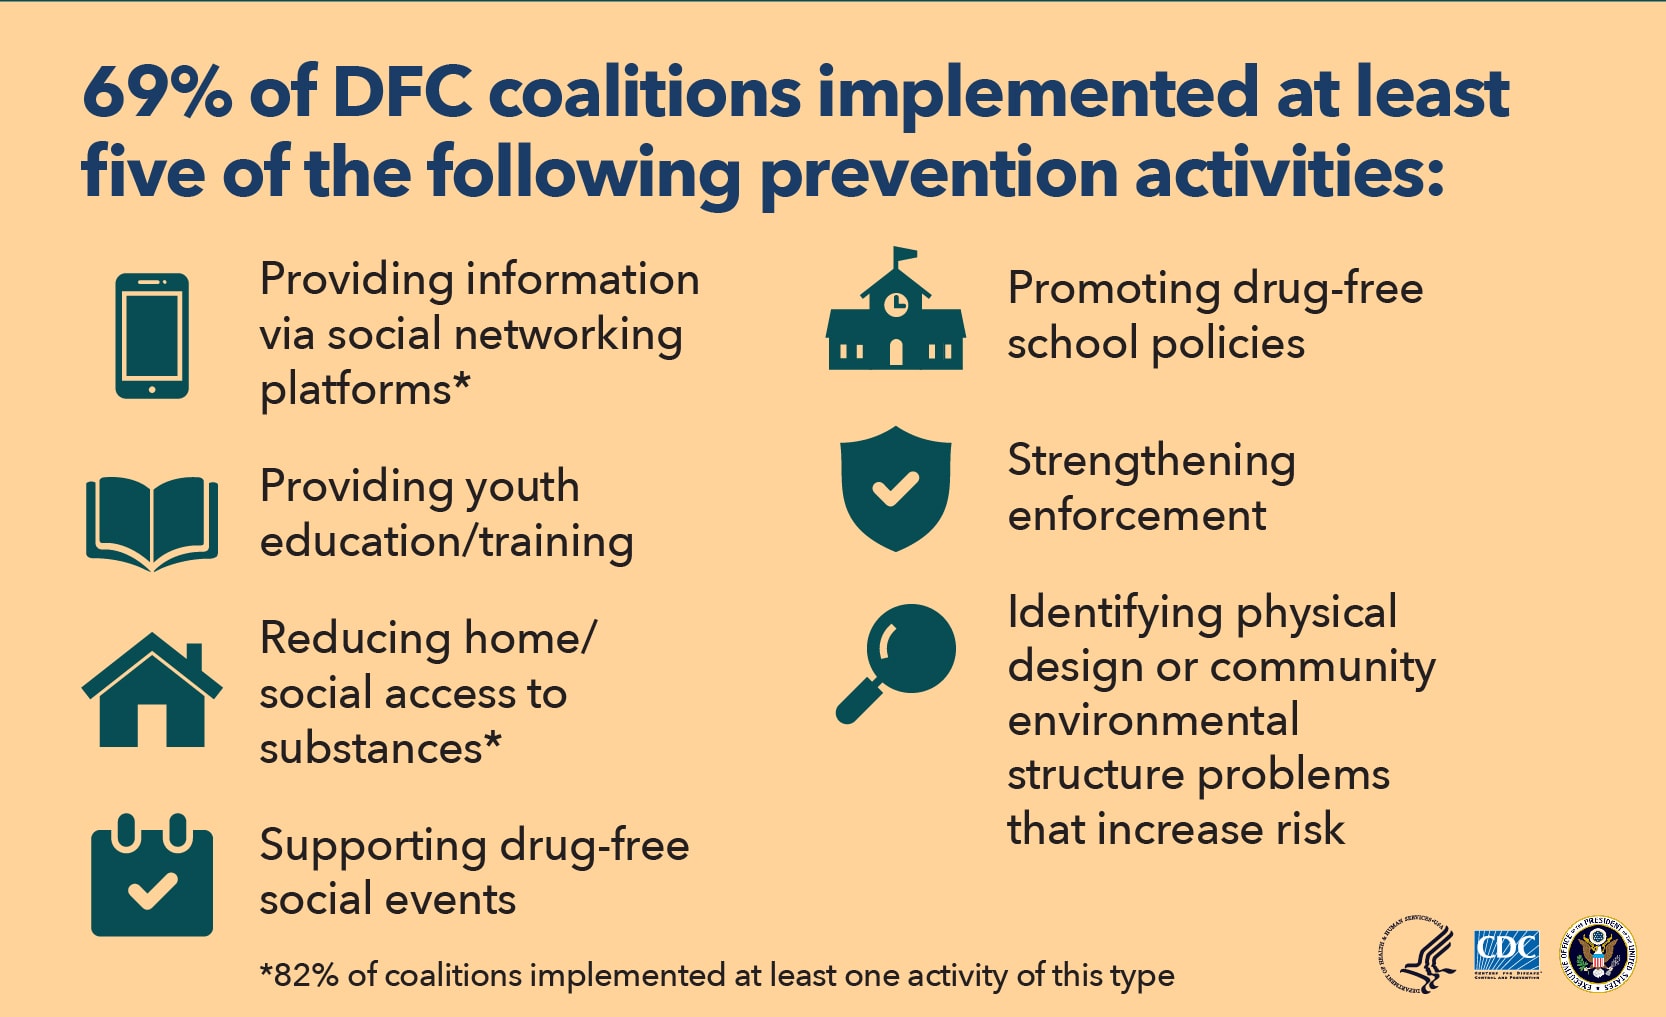 69% of DFC coalitions implemented at least five of the following prevention activities: Providing information via social networking platforms*. Providing youth education/training. Reducing home/ social access to substances*. Supporting drug-free social events. Promoting drug-free school policies. Strengthening enforcement. Identifying physical design or community environmental structure problems that increase risk. *82% of coalitions implemented at least one activity of this type